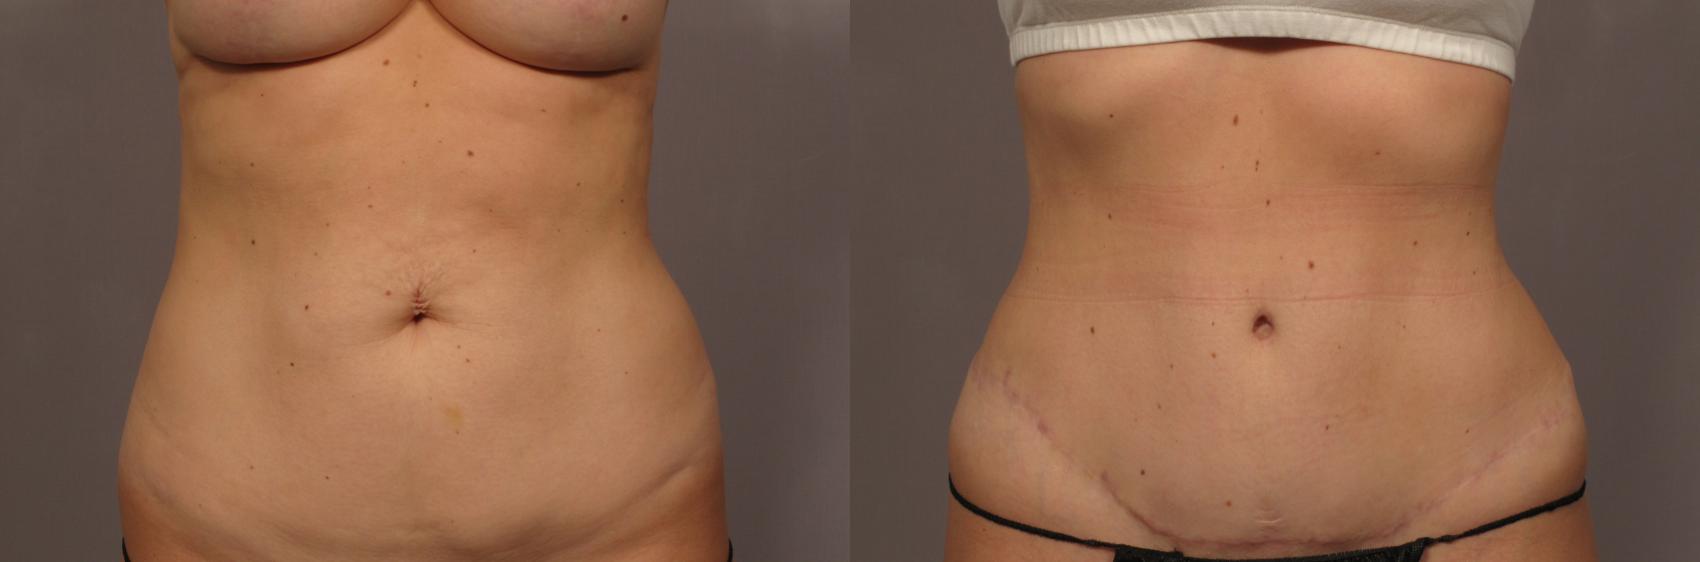 Tummy Tuck gone wrong - Mirror Online